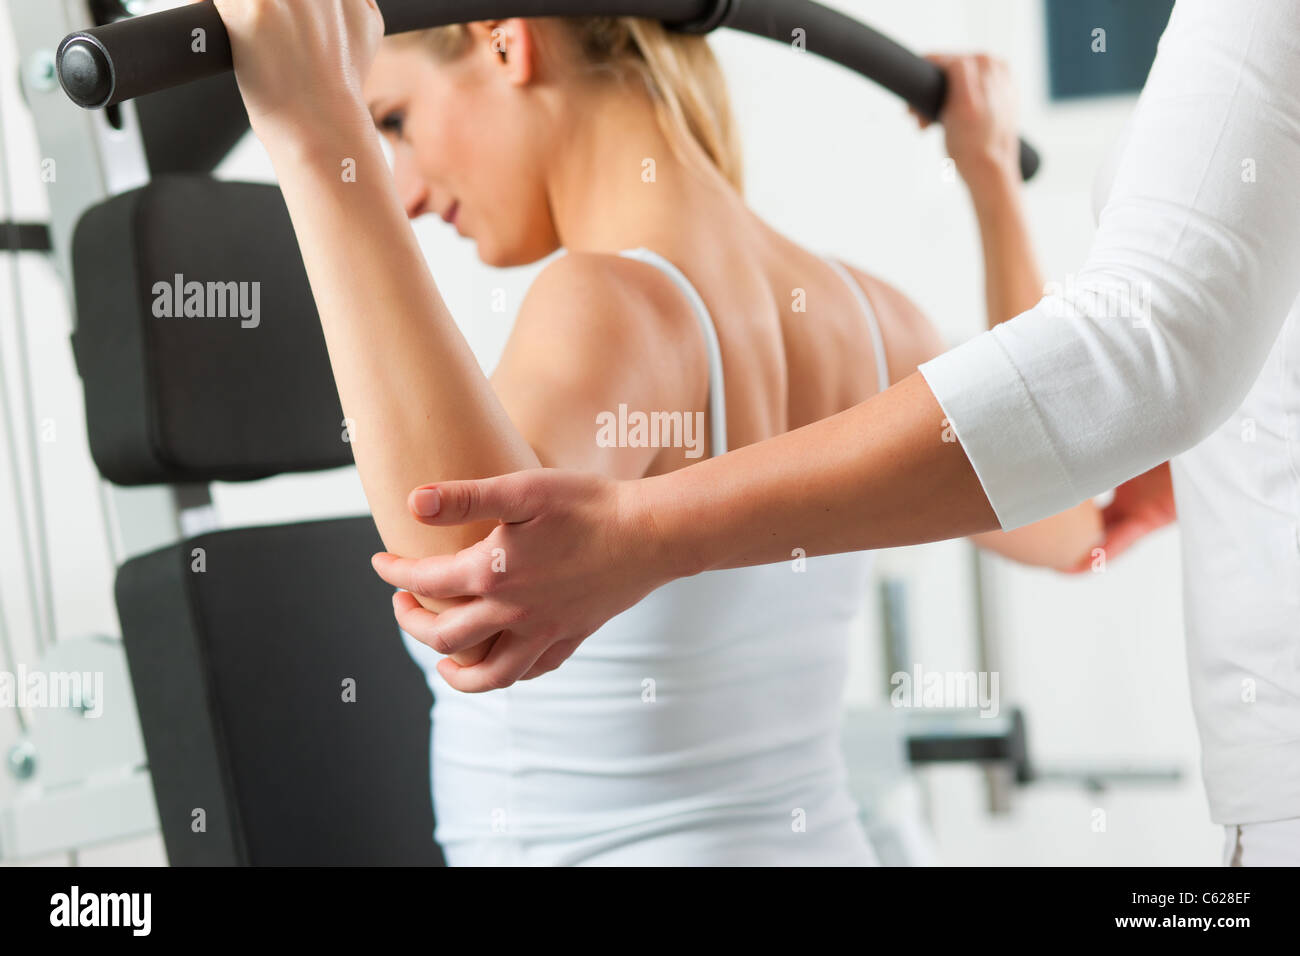 Patient at the physiotherapy making physical exercises Stock Photo